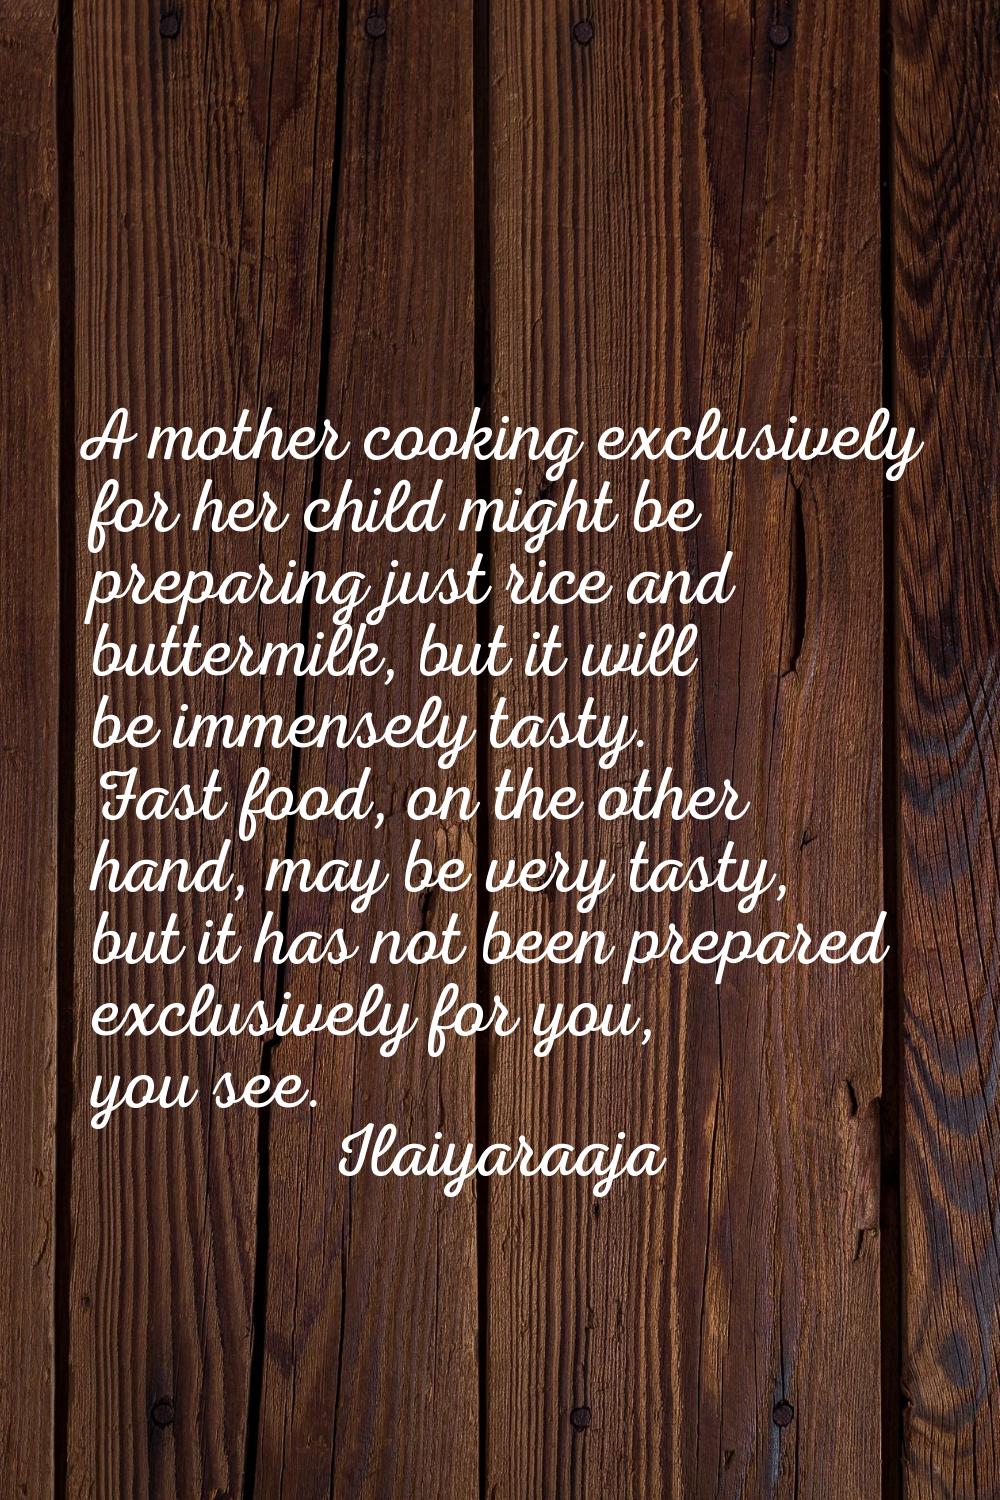 A mother cooking exclusively for her child might be preparing just rice and buttermilk, but it will